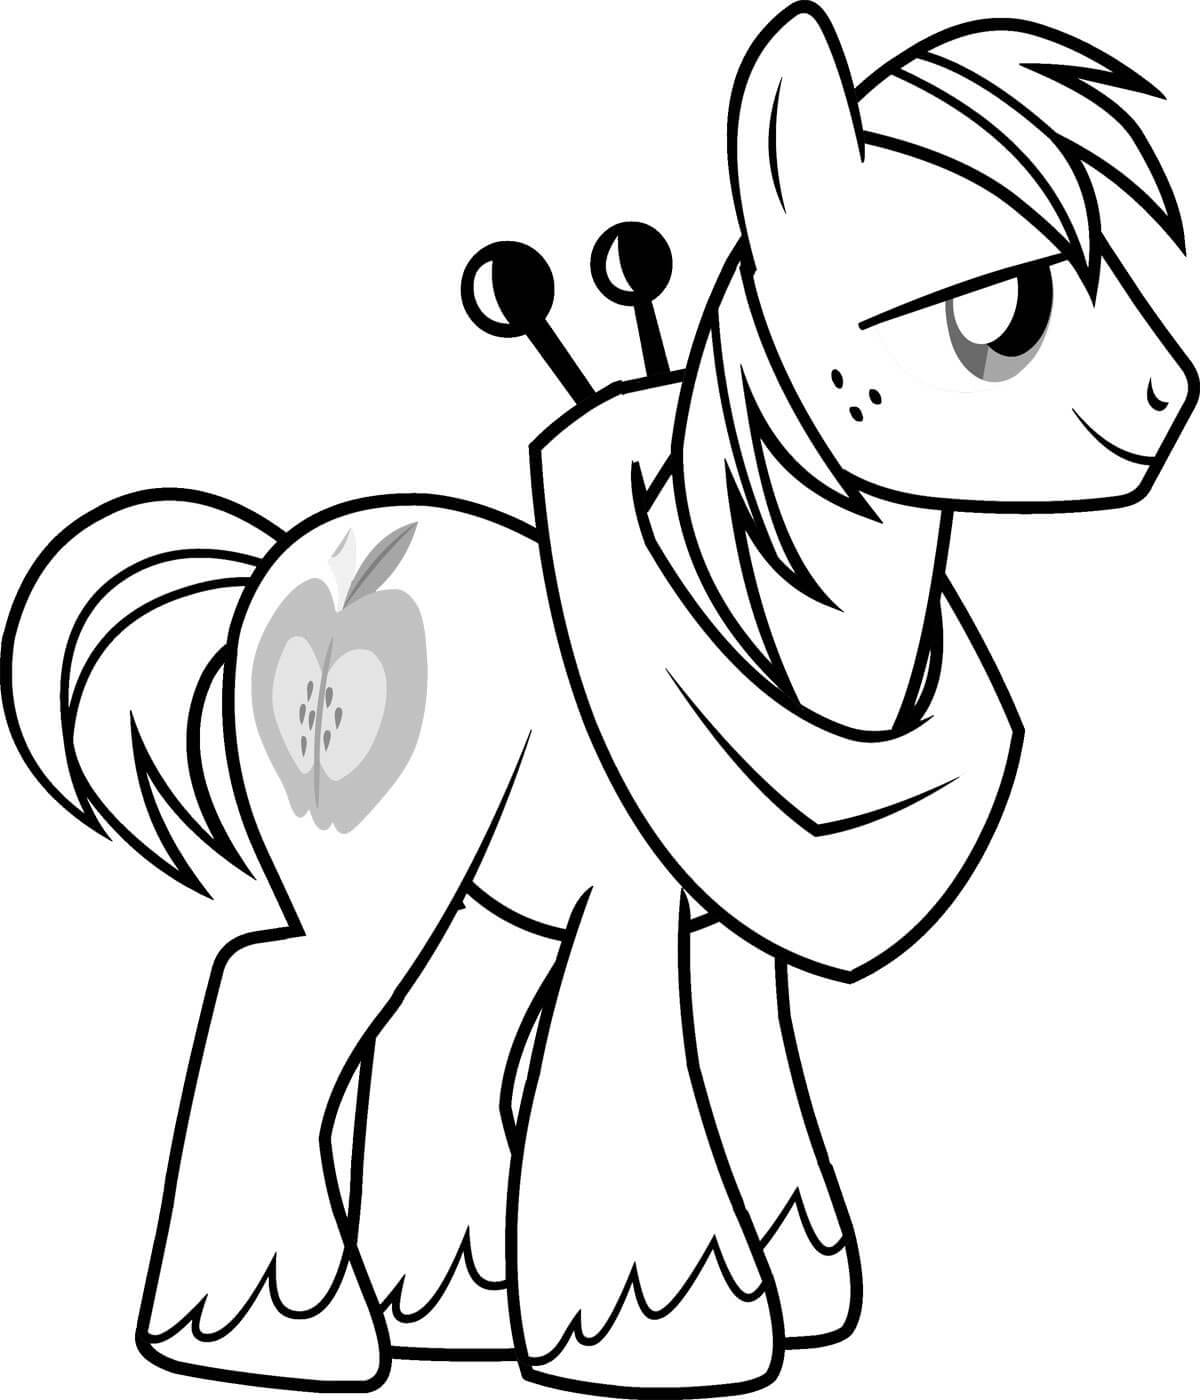 Free Printable My Little Pony Coloring Pages For Kids  My little pony  coloring, My little pony movie, My little pony twilight